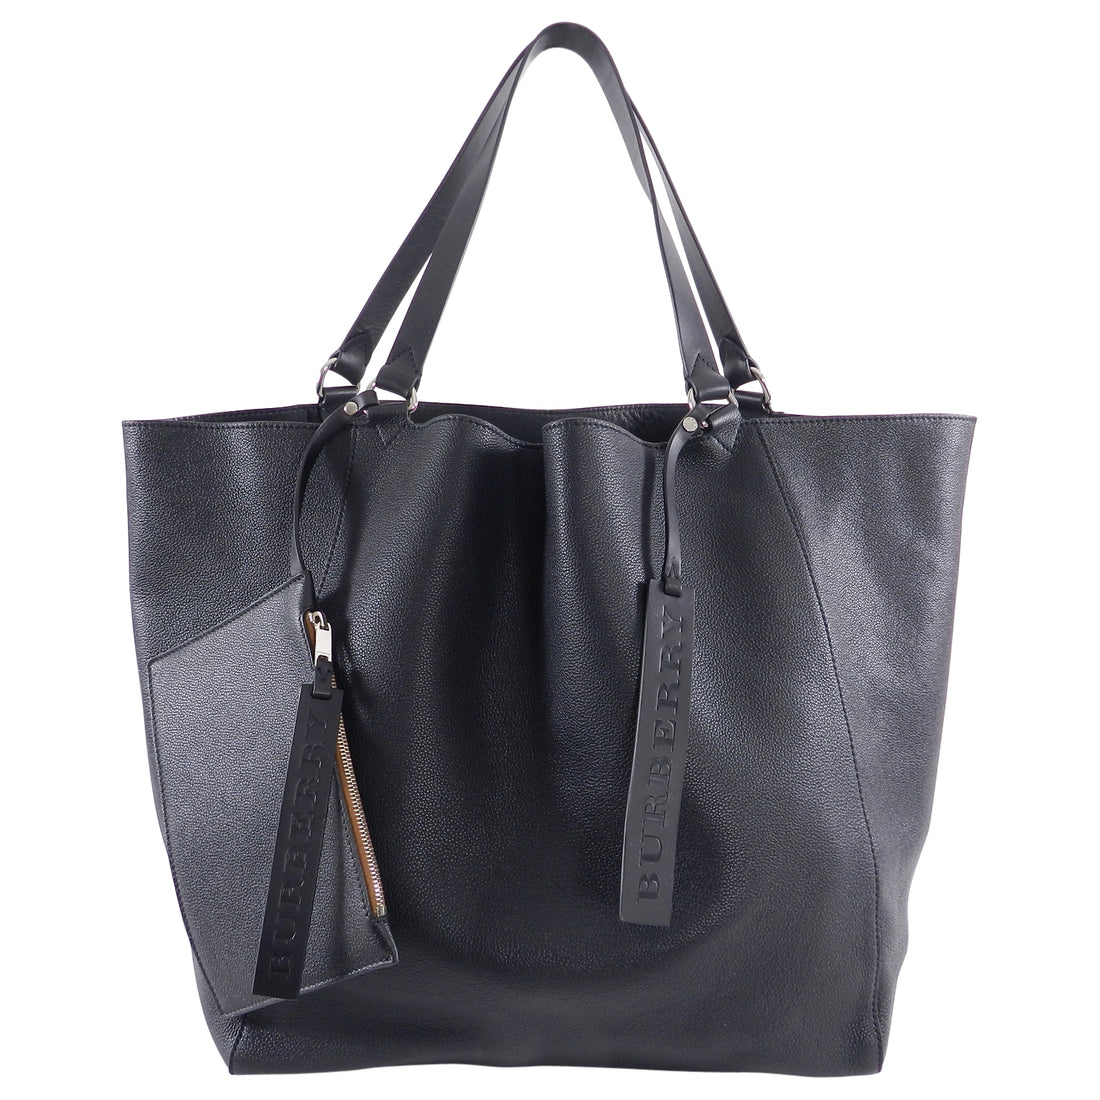 Burberry Extra Large Black Floppy Grained Leather Tote Bag – I MISS YOU VINTAGE